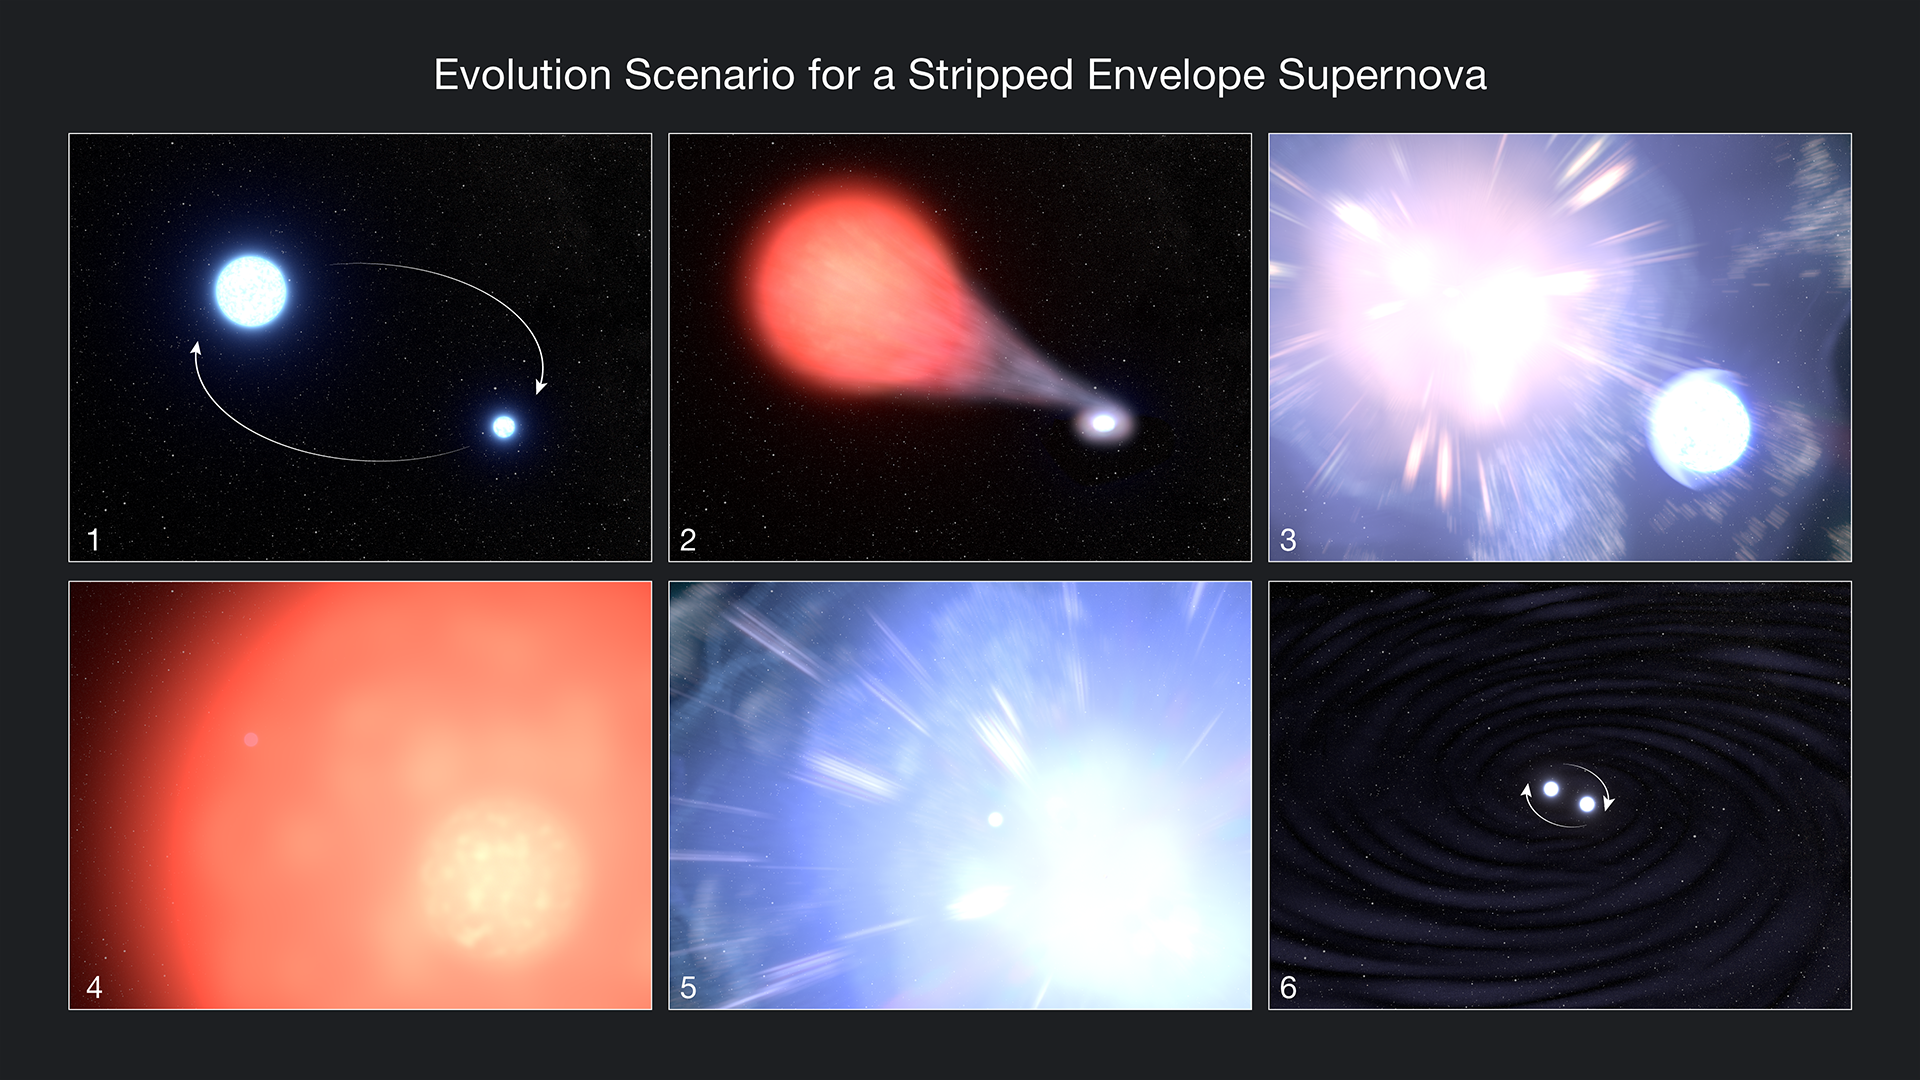 Top L-R 1) large white star, smaller white star 2) Large red star gas streaming to smaller star 3) pinkish-white supernova, irradiated smaller star. Bottom L-R 4) orange star 5) blue-white supernova 6) white star cores orbiting each other